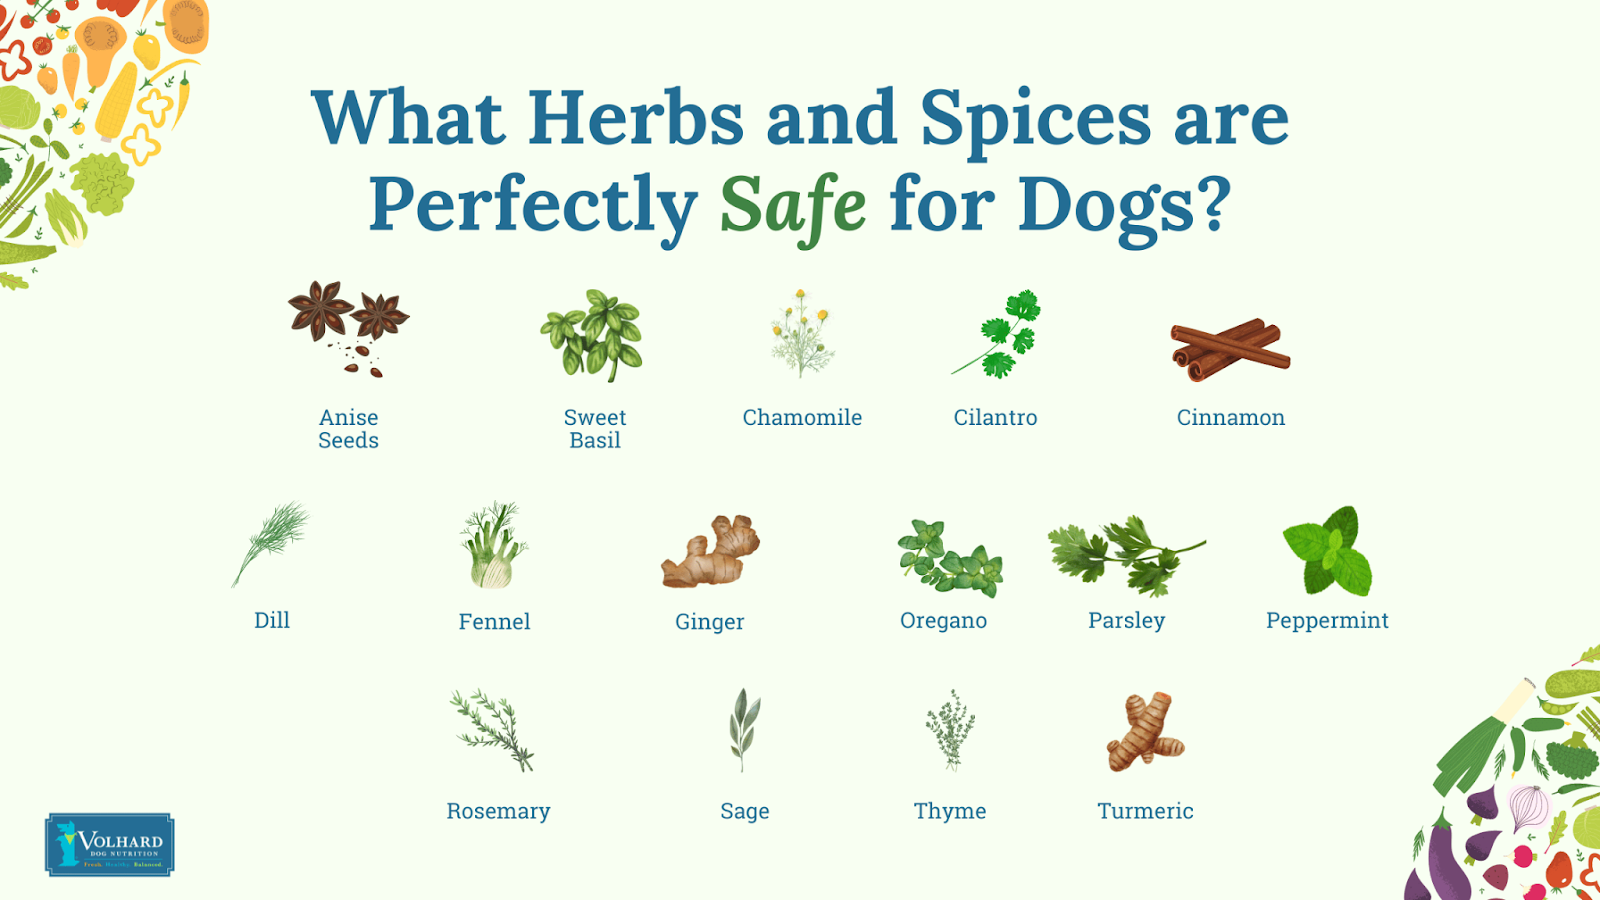 Herbs and spices that are perfectly safe for dogs